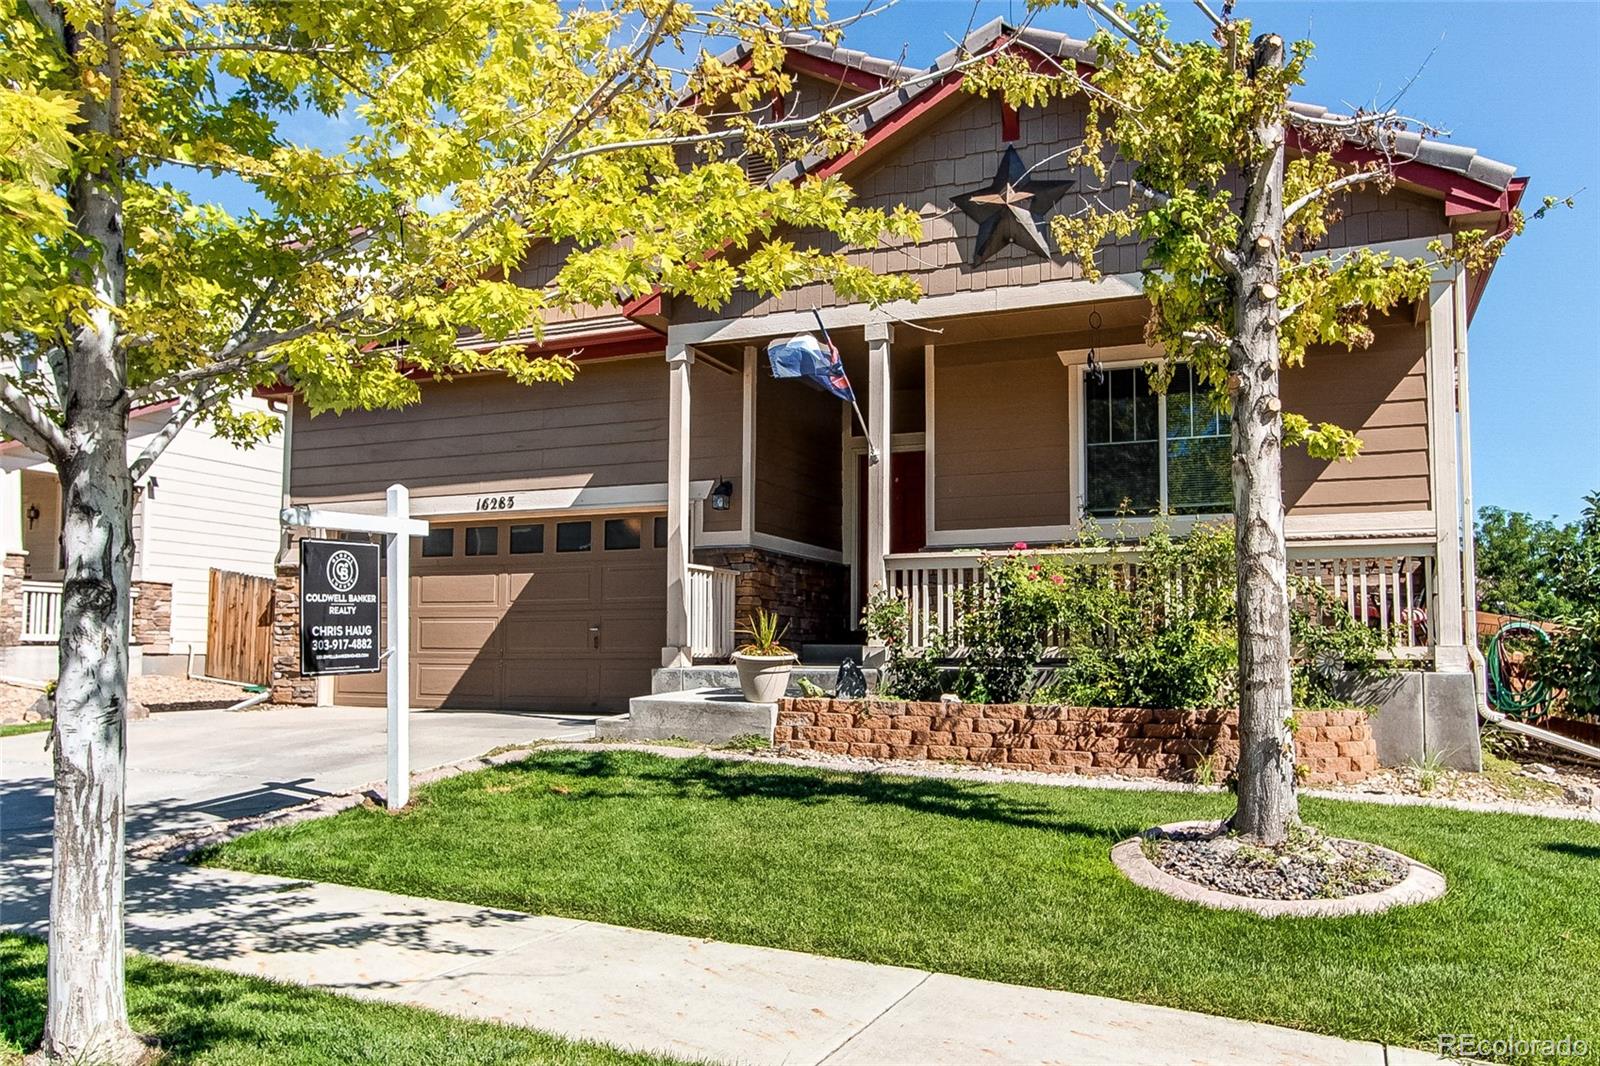 16283  98th Way, commerce city MLS: 1793423 Beds: 5 Baths: 3 Price: $600,000